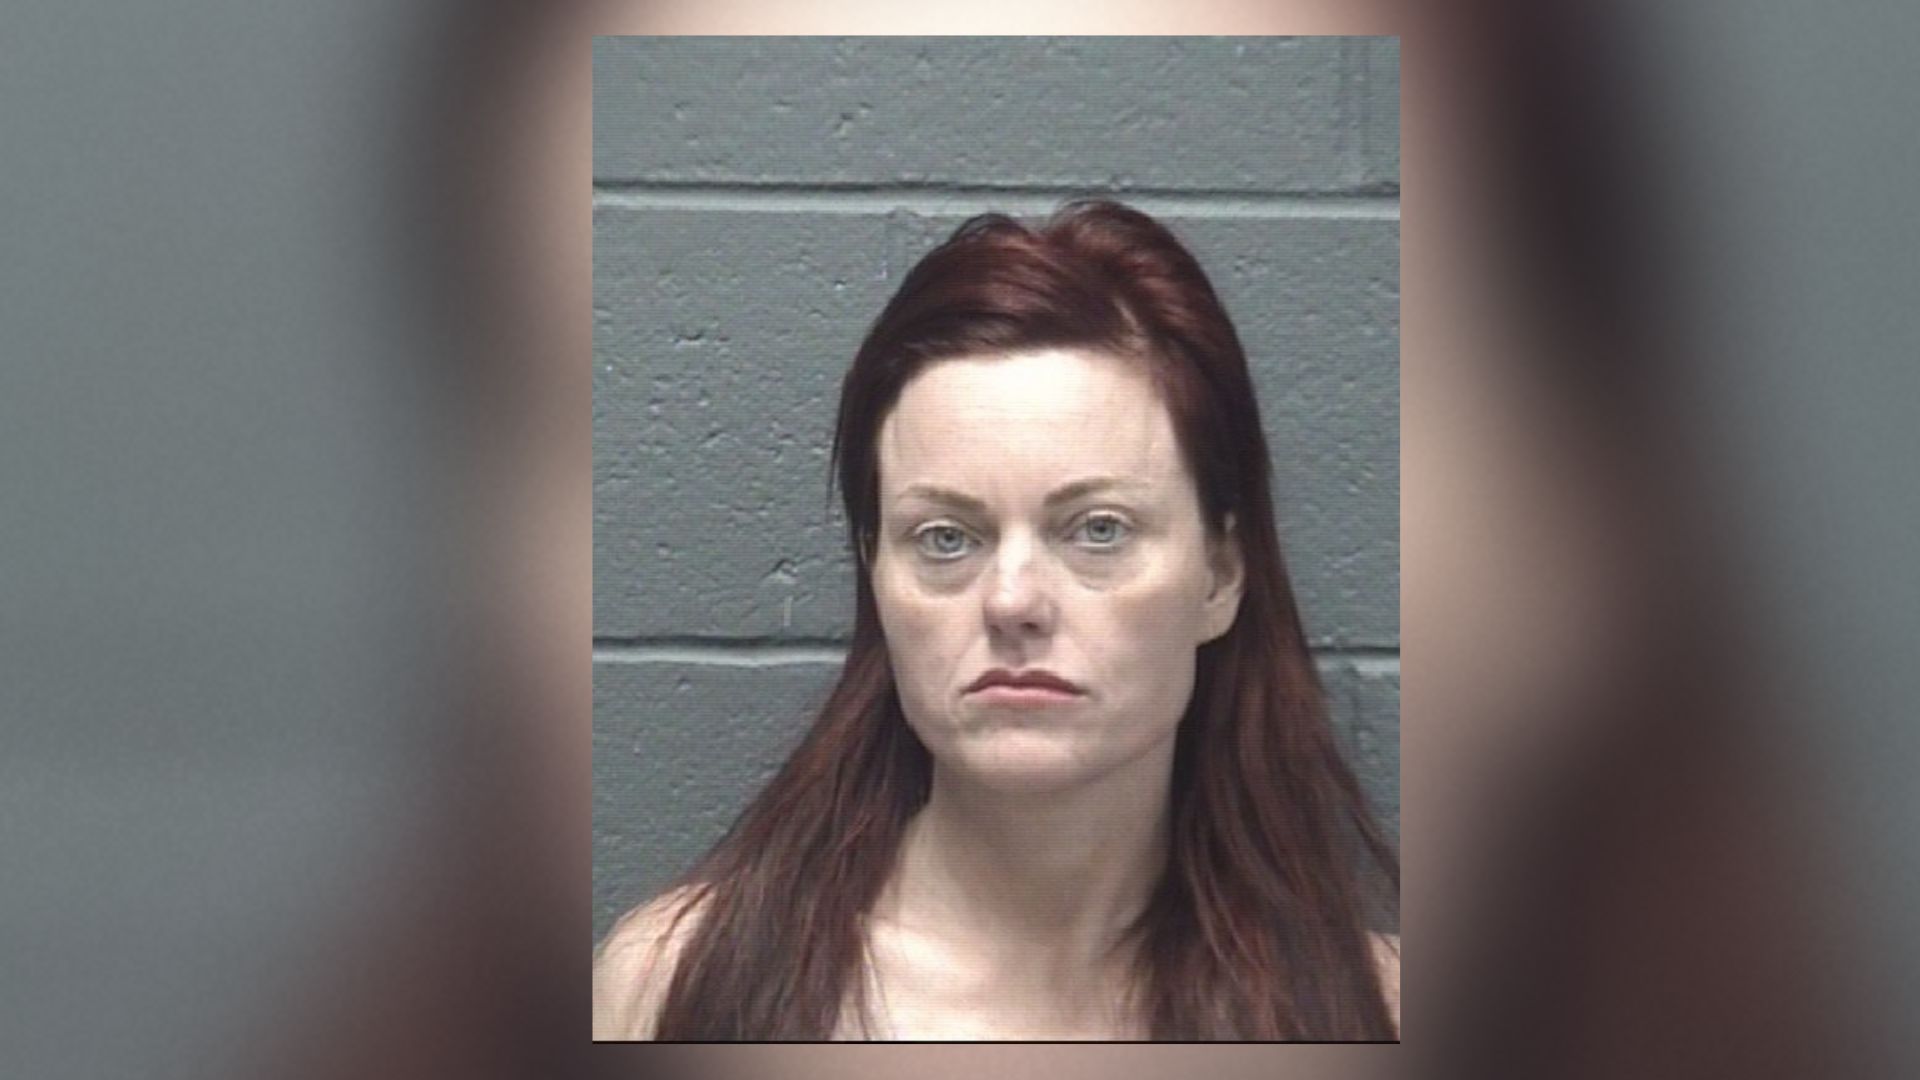 Woman arrested, accused of embezzling around $200,000 from employer, deputies